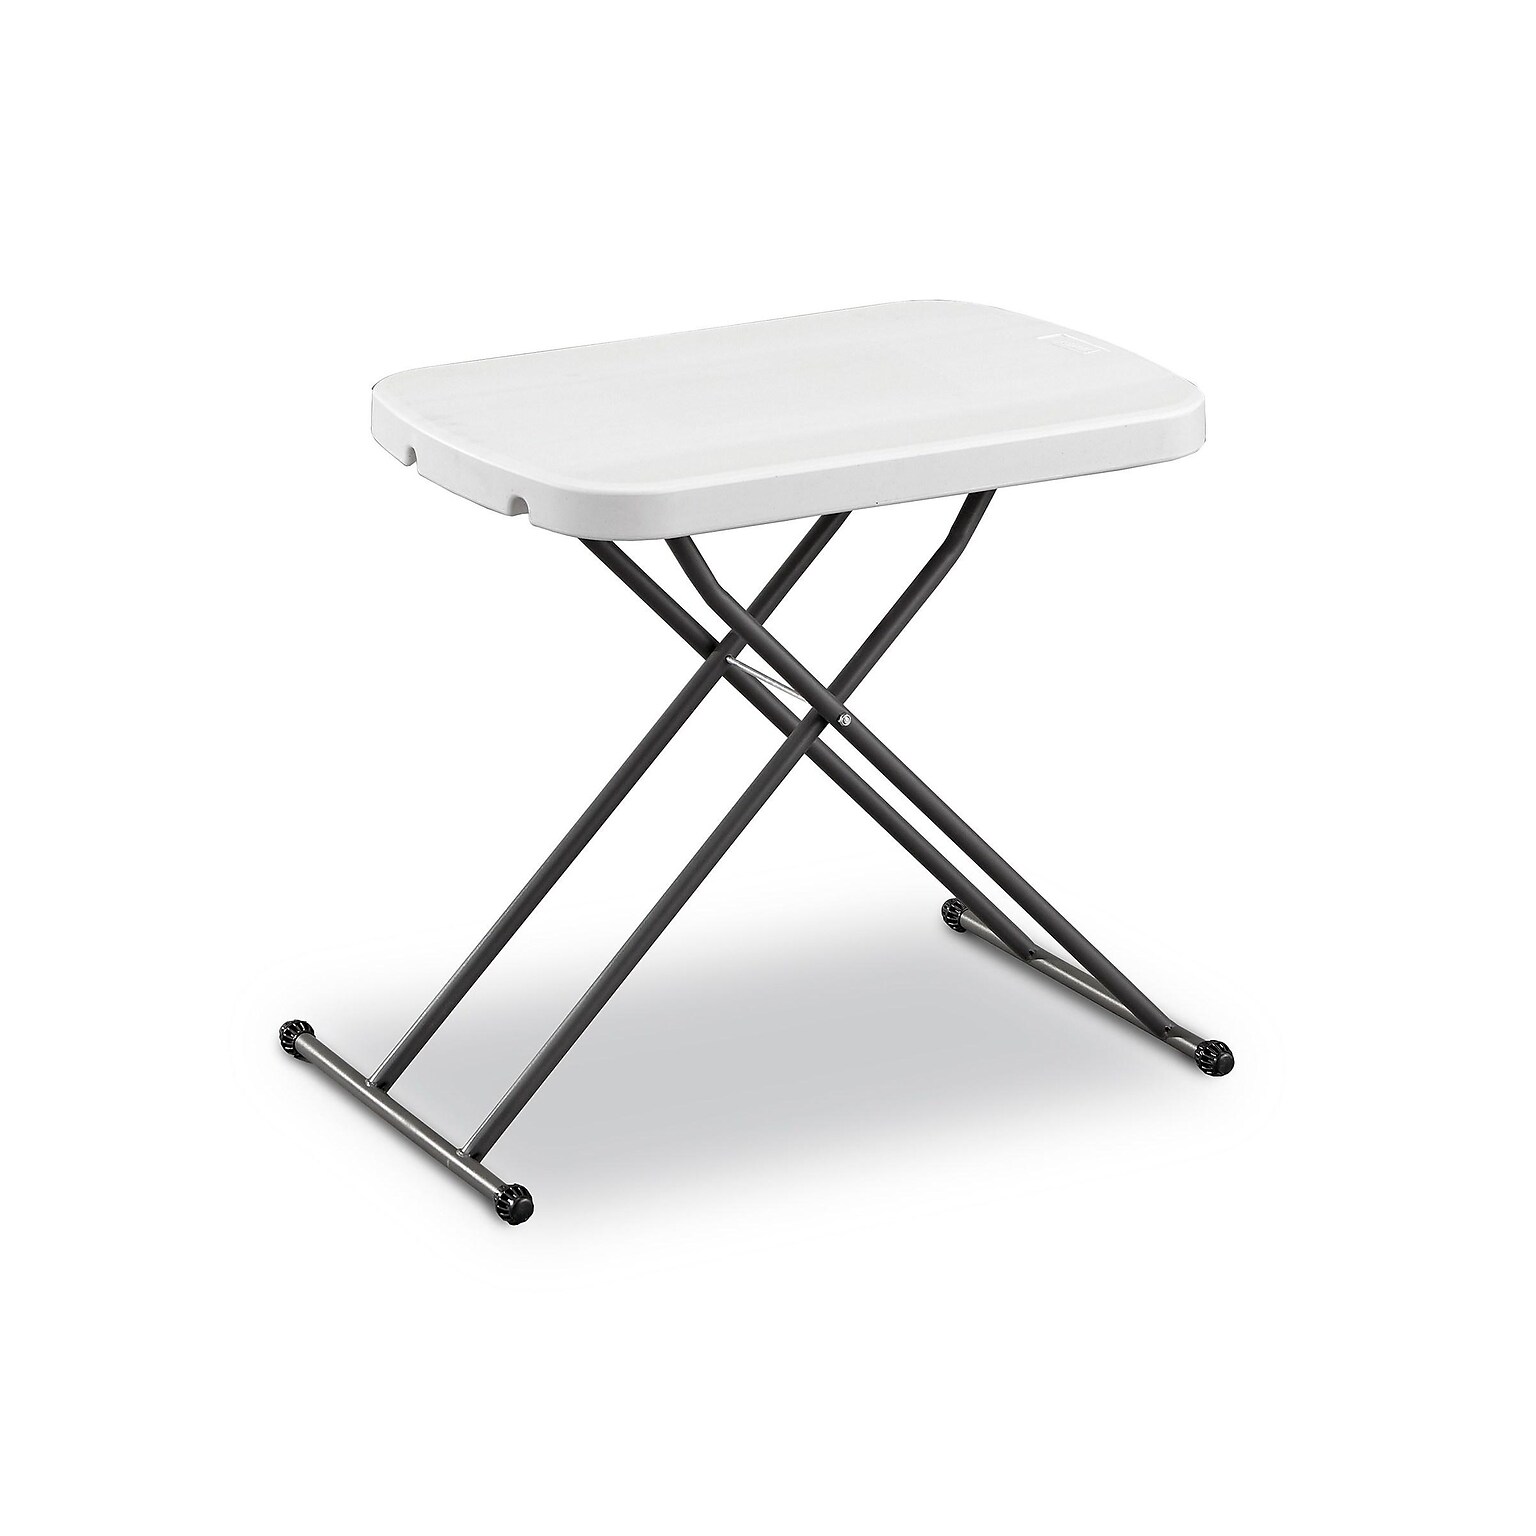 Quill Brand® Personal Folding Table, 25.5L x 17.8W, Gray (79143)